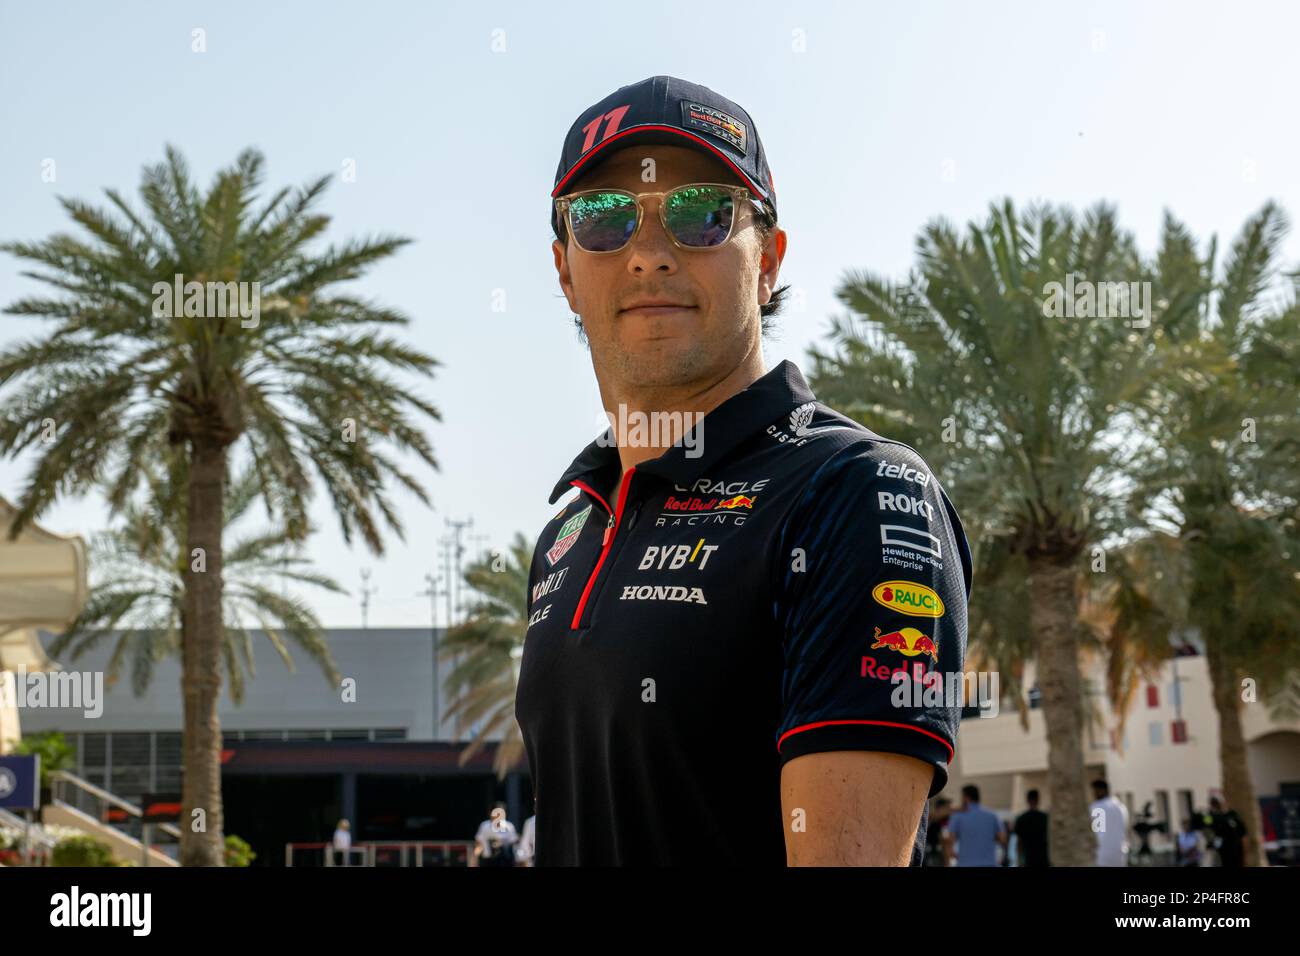 BAHRAIN INTERNATIONAL CIRCUIT, BAHRAIN - MARCH 05: Sergio Perez, Red Bull Racing RB19 during the Bahrain Grand Prix at Bahrain International Circuit on Sunday March 05, 2023 in Sakhir, Bahrain. (Photo by Michael Potts/BSR Agency) Stock Photo